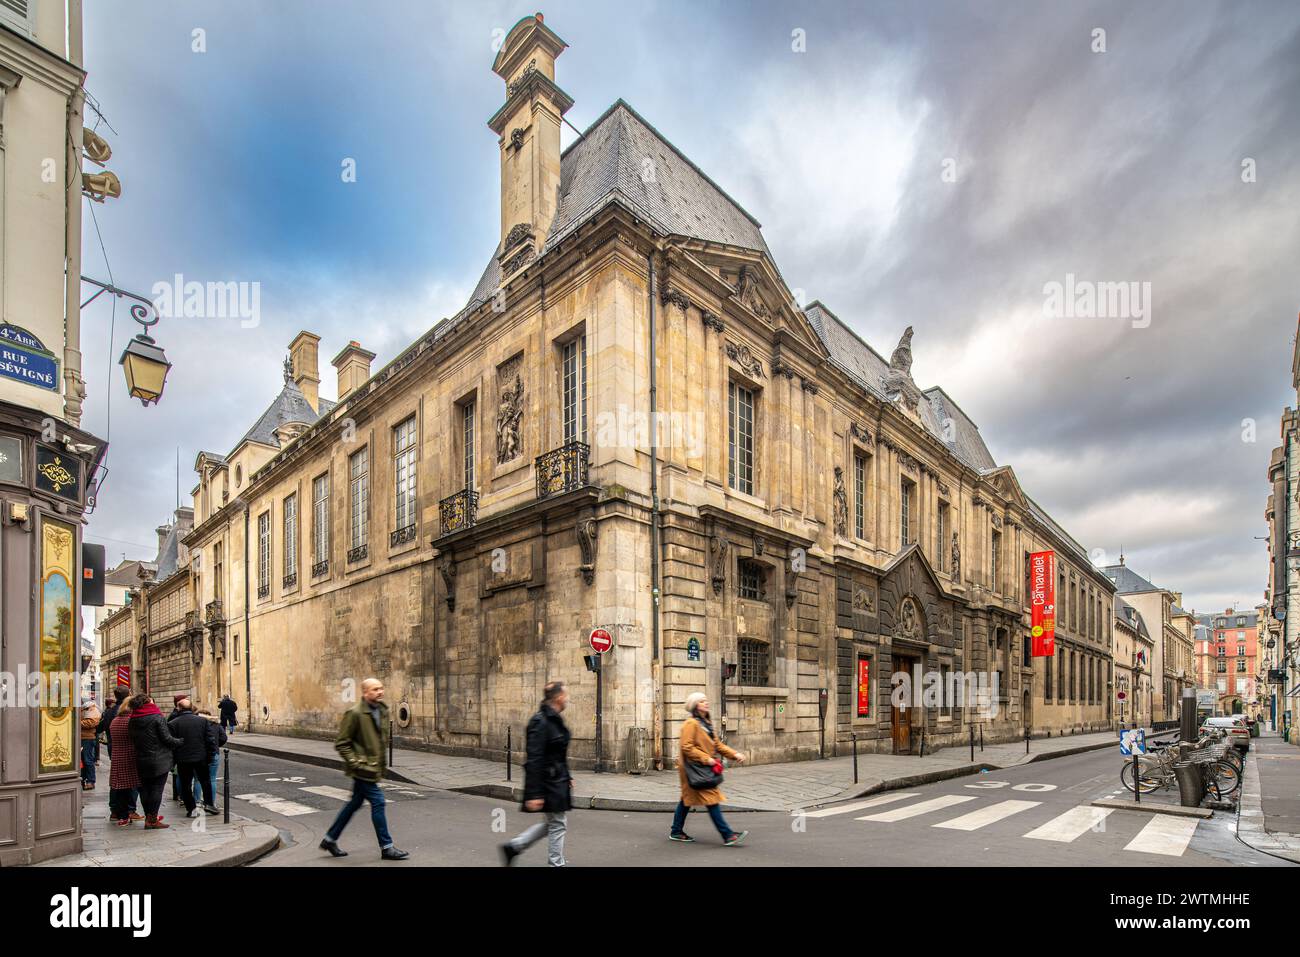 Group of pedestrians crossing a street in front of Carnavalet Museum, a historic building in Paris. Stock Photo